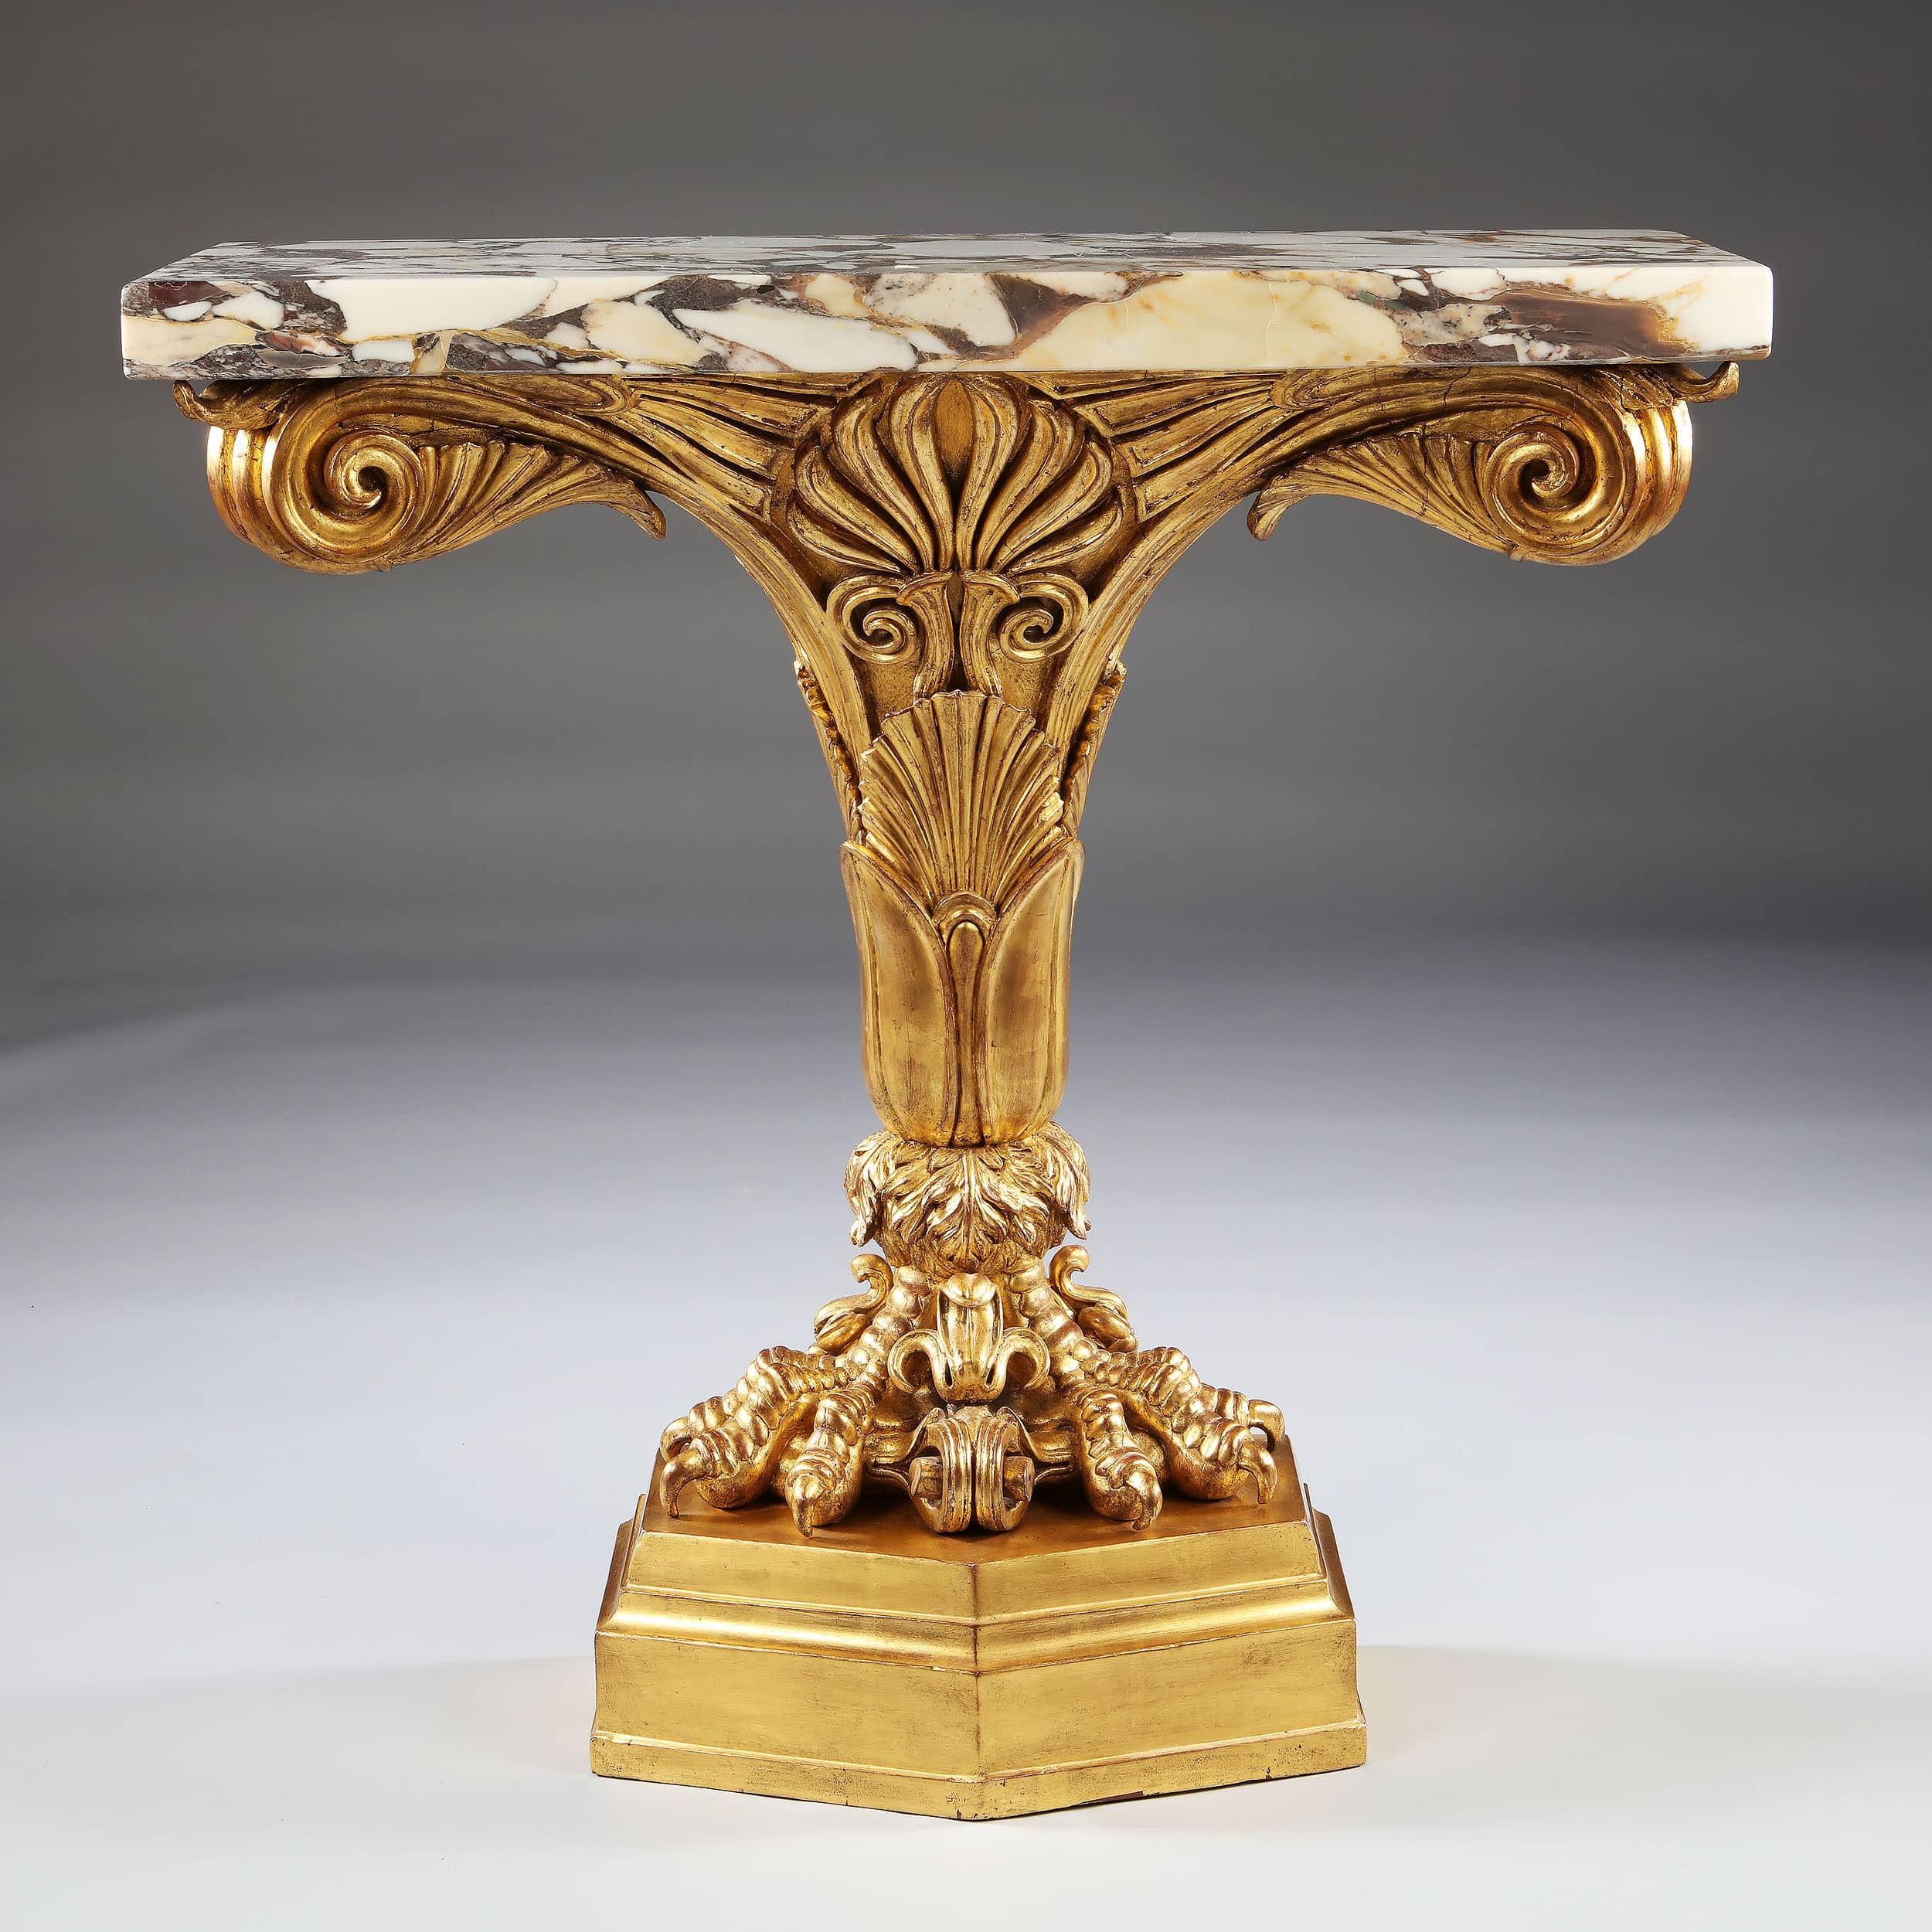 A fine pair of early 19th-century water gilt monopodia console tables, richly carved with strong vivid ornament of bold anthemions, substantial scrolled tops and supported on pierced claw feet, throughout showing great skill and attention to detail.